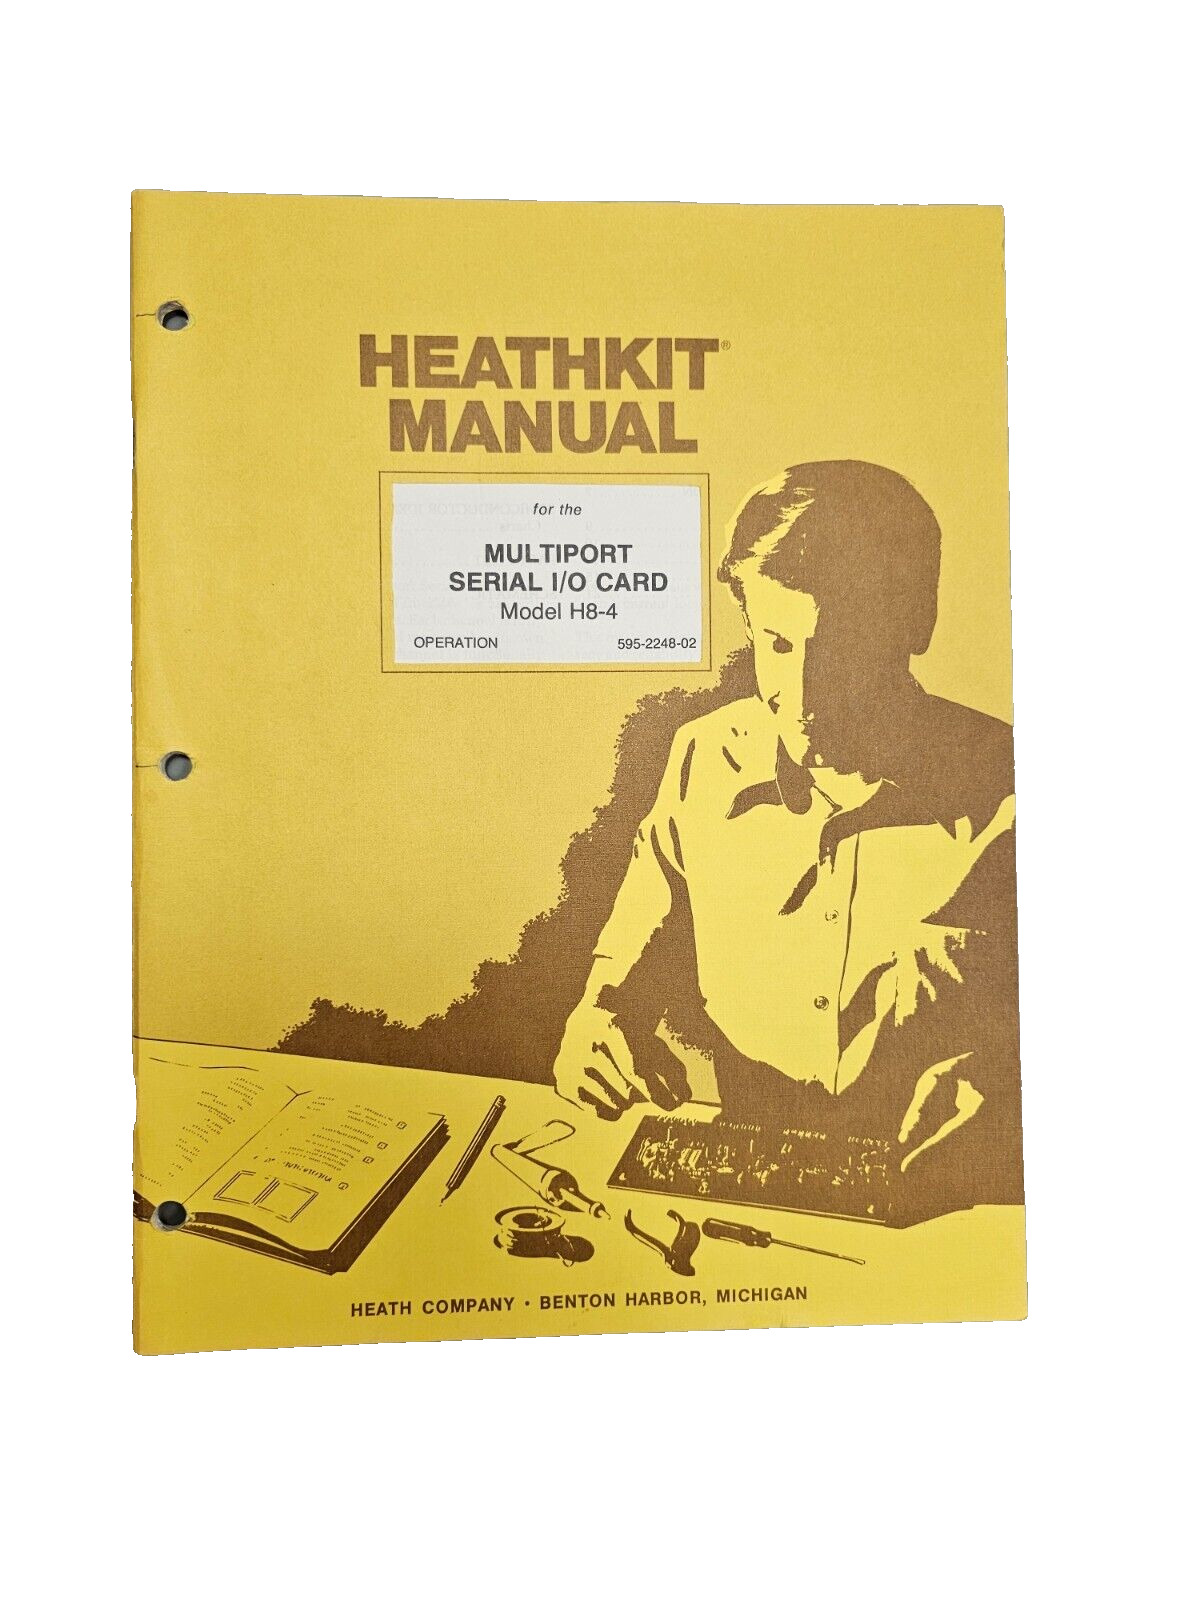 Vintage 70's Heathkit Manual Multiport Serial IO Card H8-4 Assembly 595-2080-02